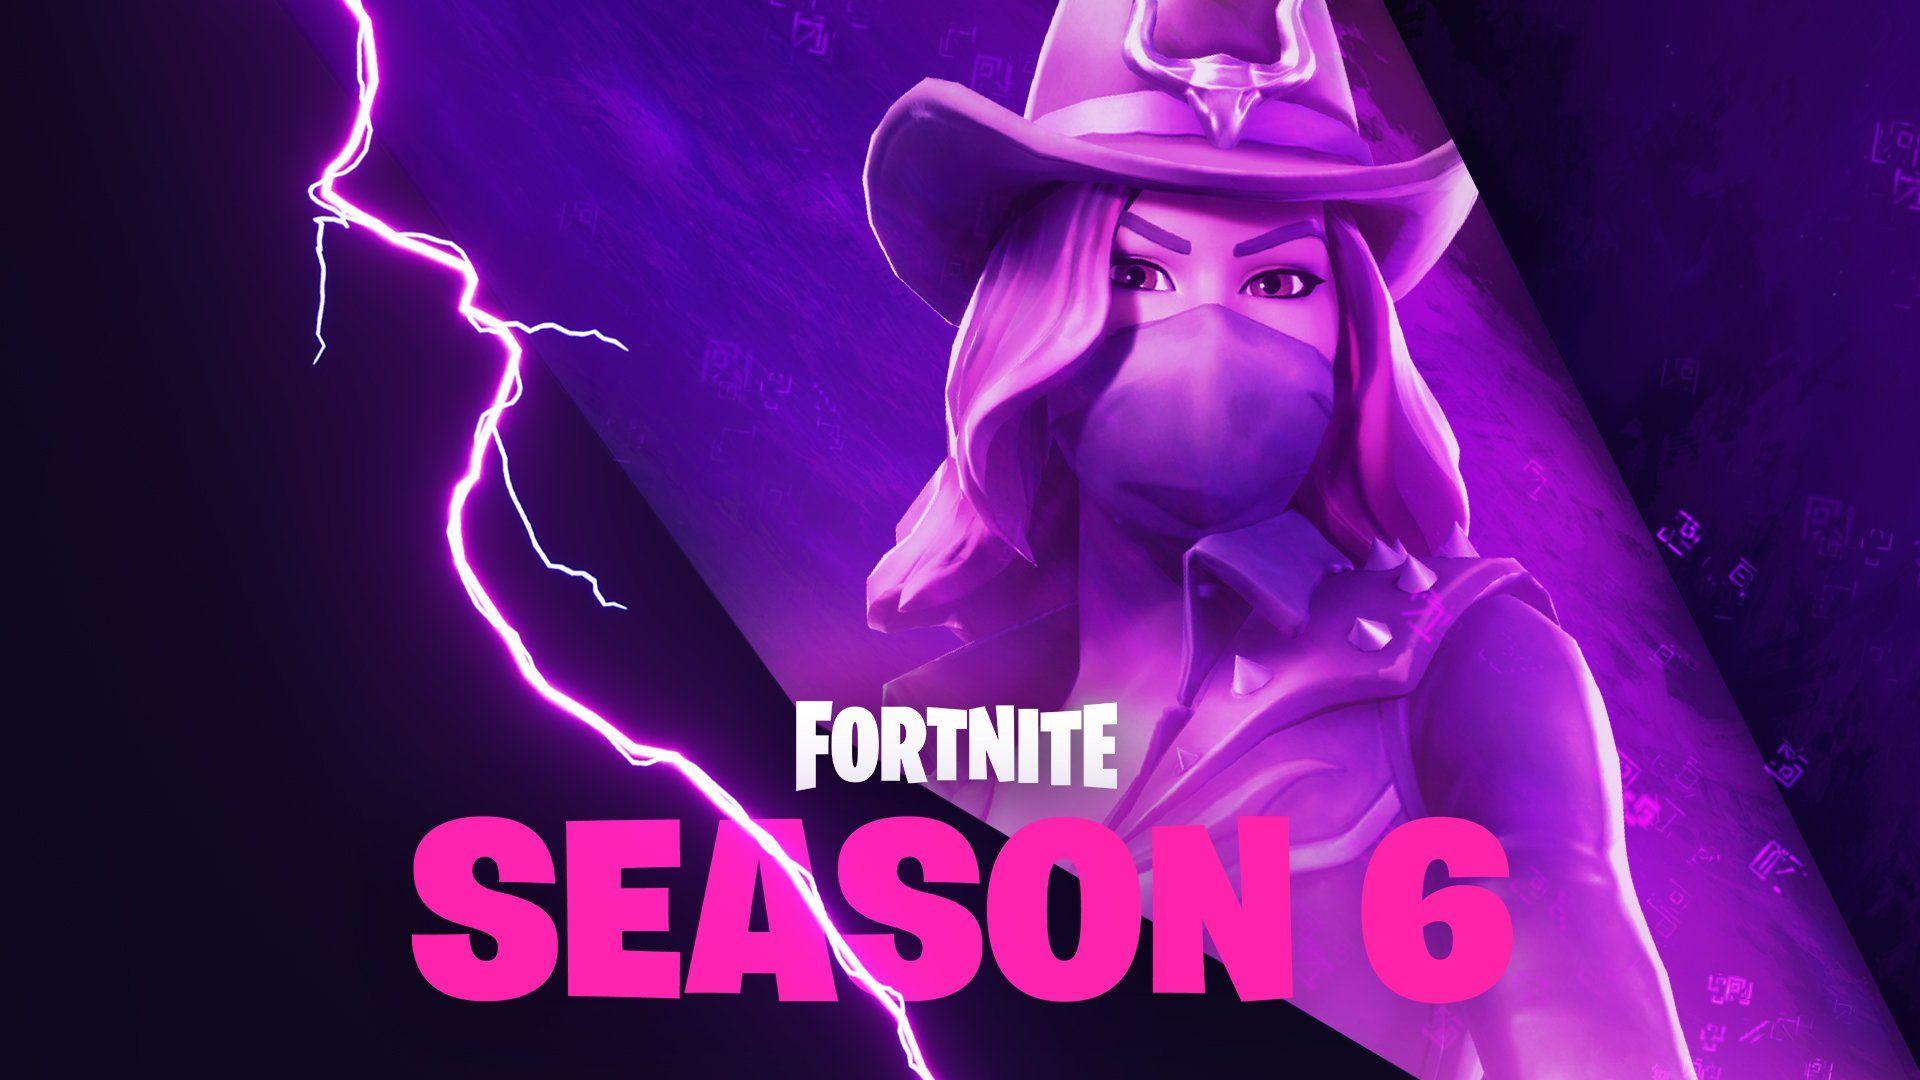 Fortnite Season 6 Guide: How to Unlock the Calamity and Dire Skins